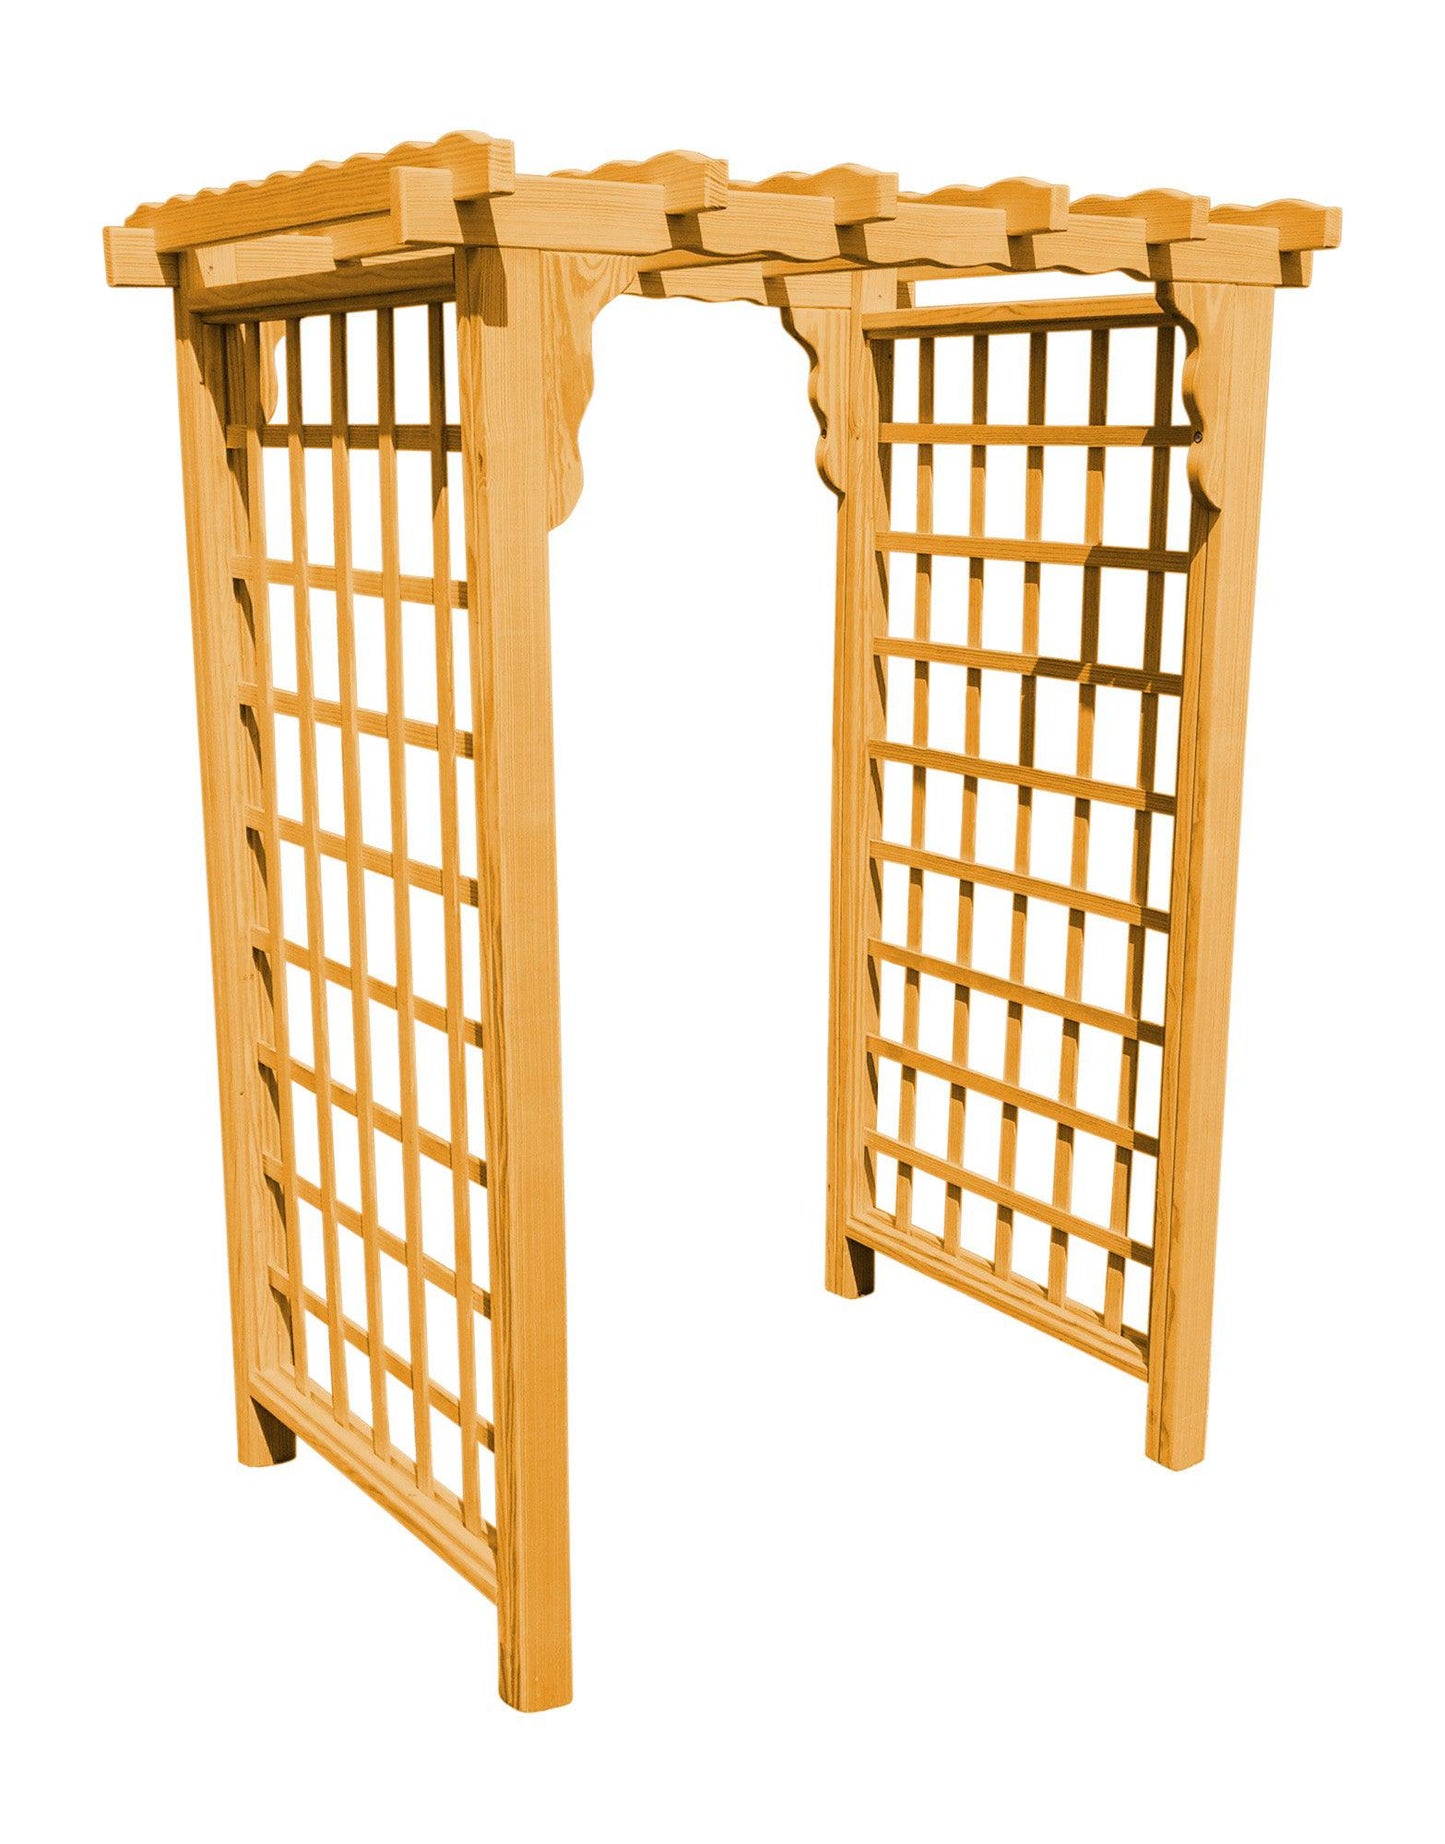 A&L FURNITURE CO. 5' Lexington Pressure Treated Pine Arbor - LEAD TIME TO SHIP 10 BUSINESS DAYS